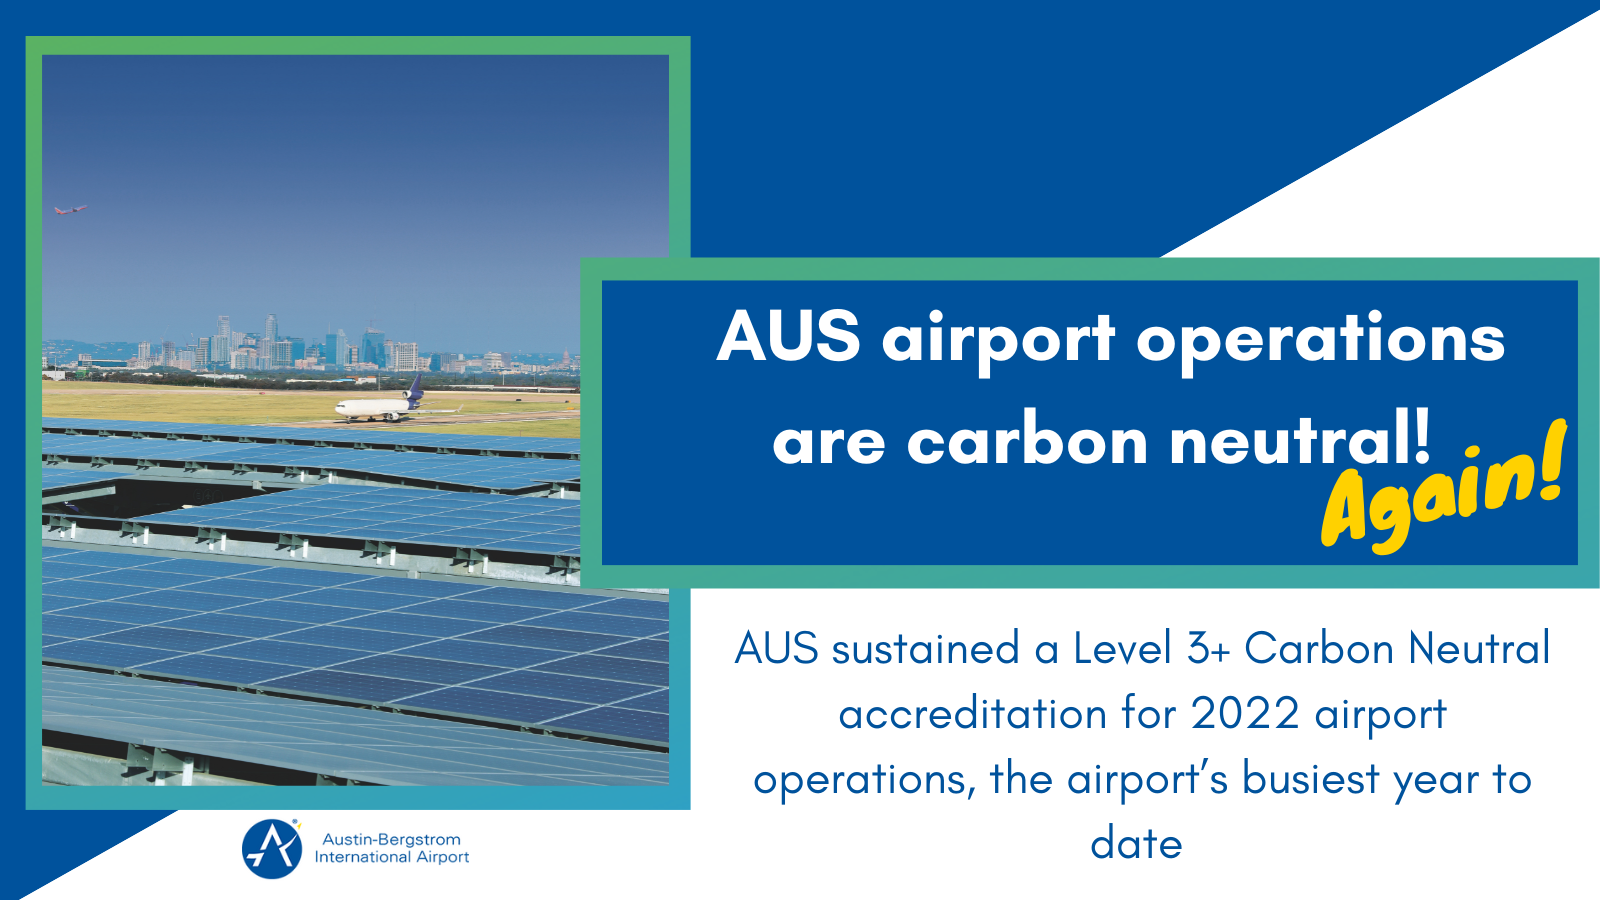 AUS airport operations are carbon neutral! Again! AUS sustained a Level 3+ Carbon Neutral accreditation for 2022 airport operations, the airport's busiest year to date